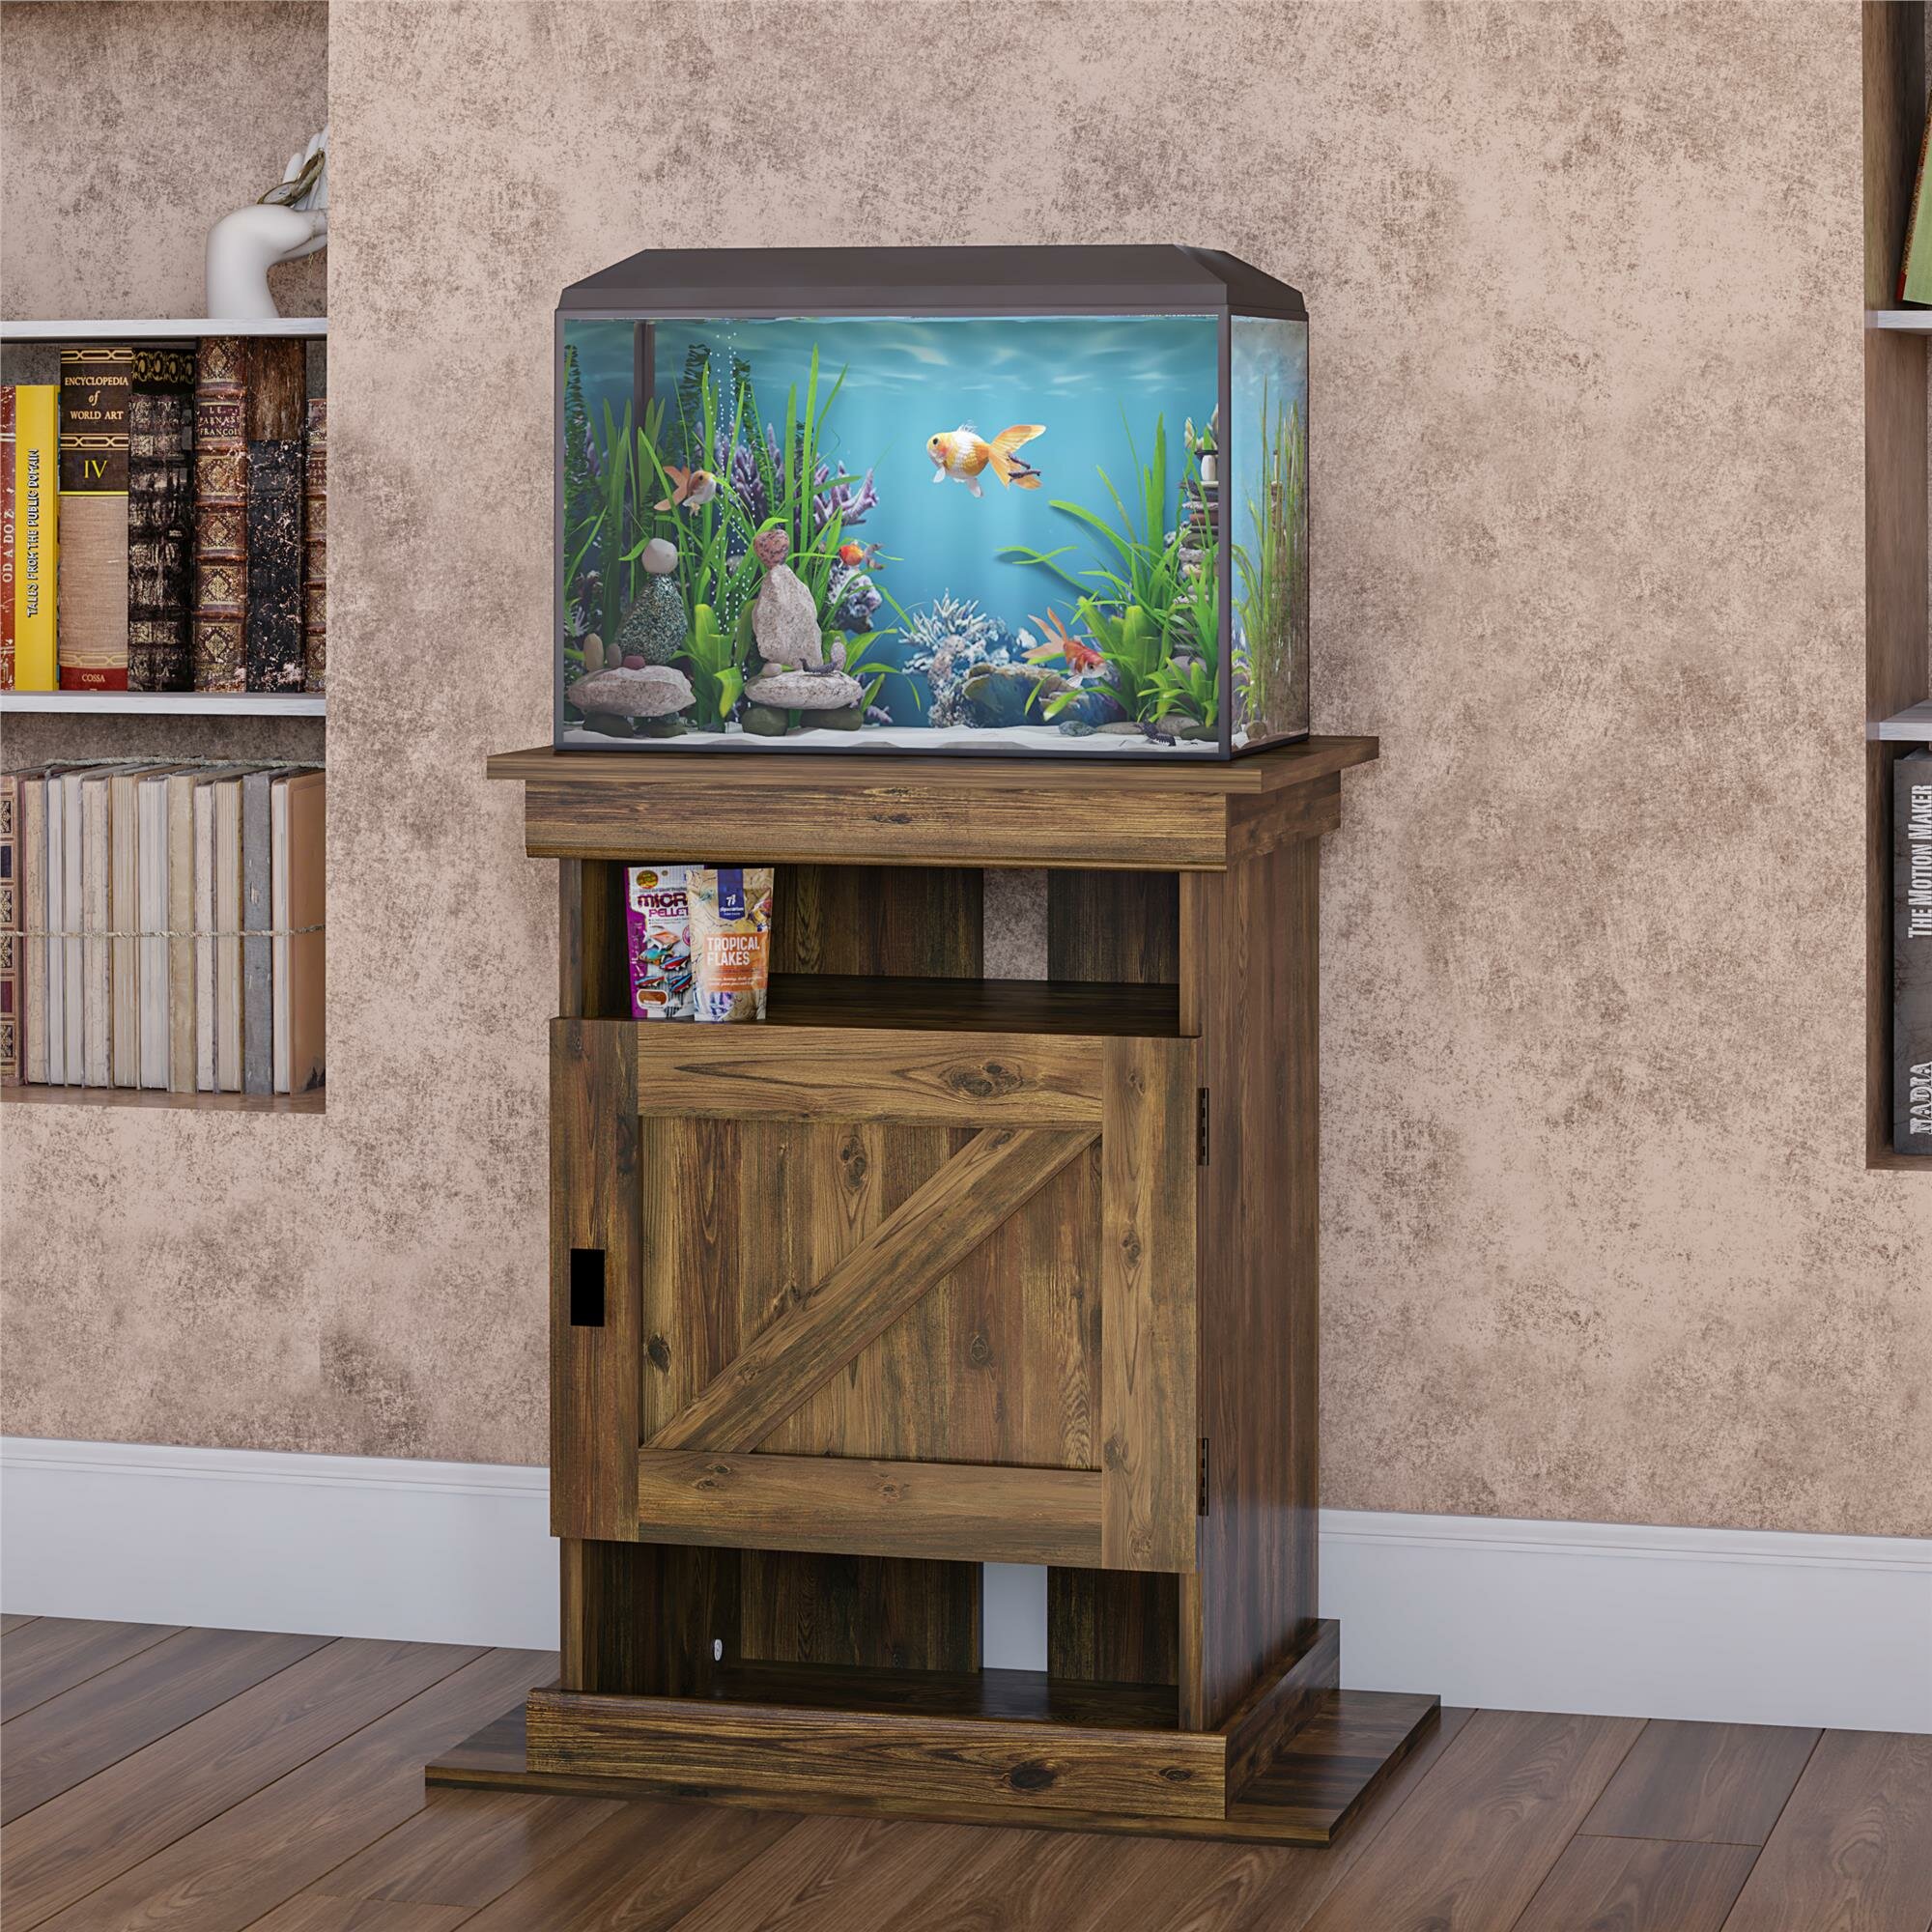 PAKASEPT Aquarium Stand with Cabinet, Fish Tank Stand with